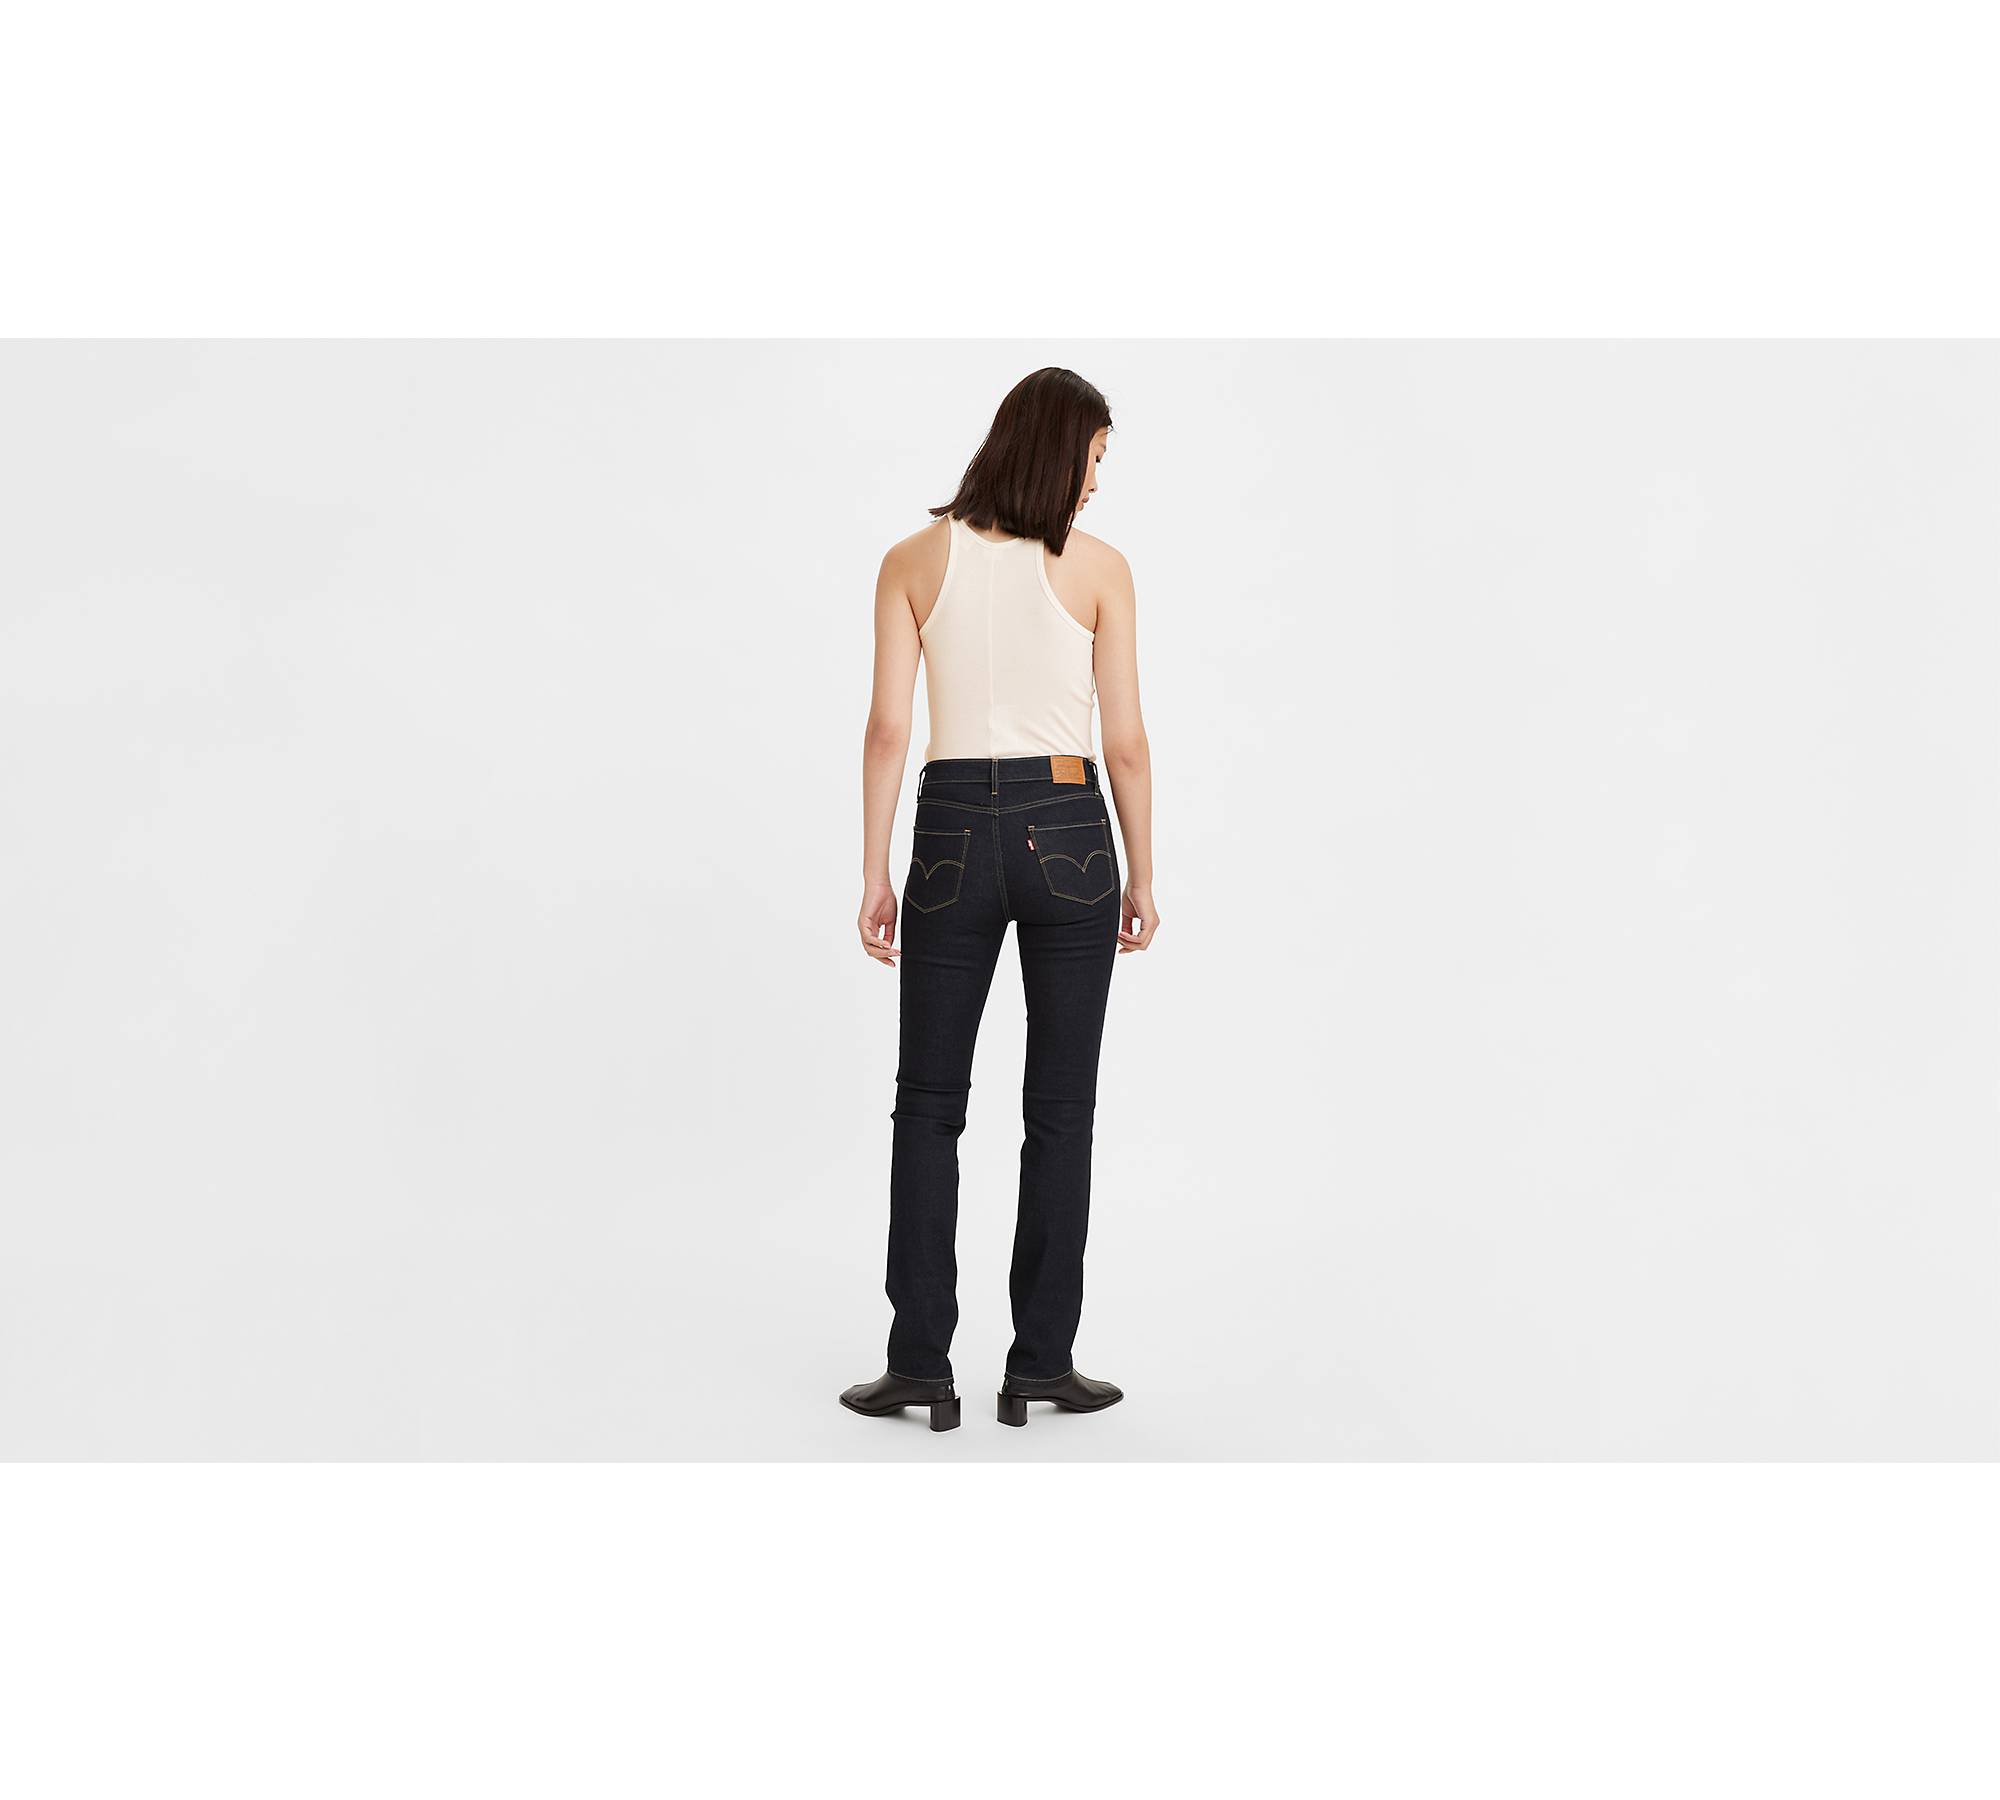 Levi's high waist straight leg jeans in mid wash